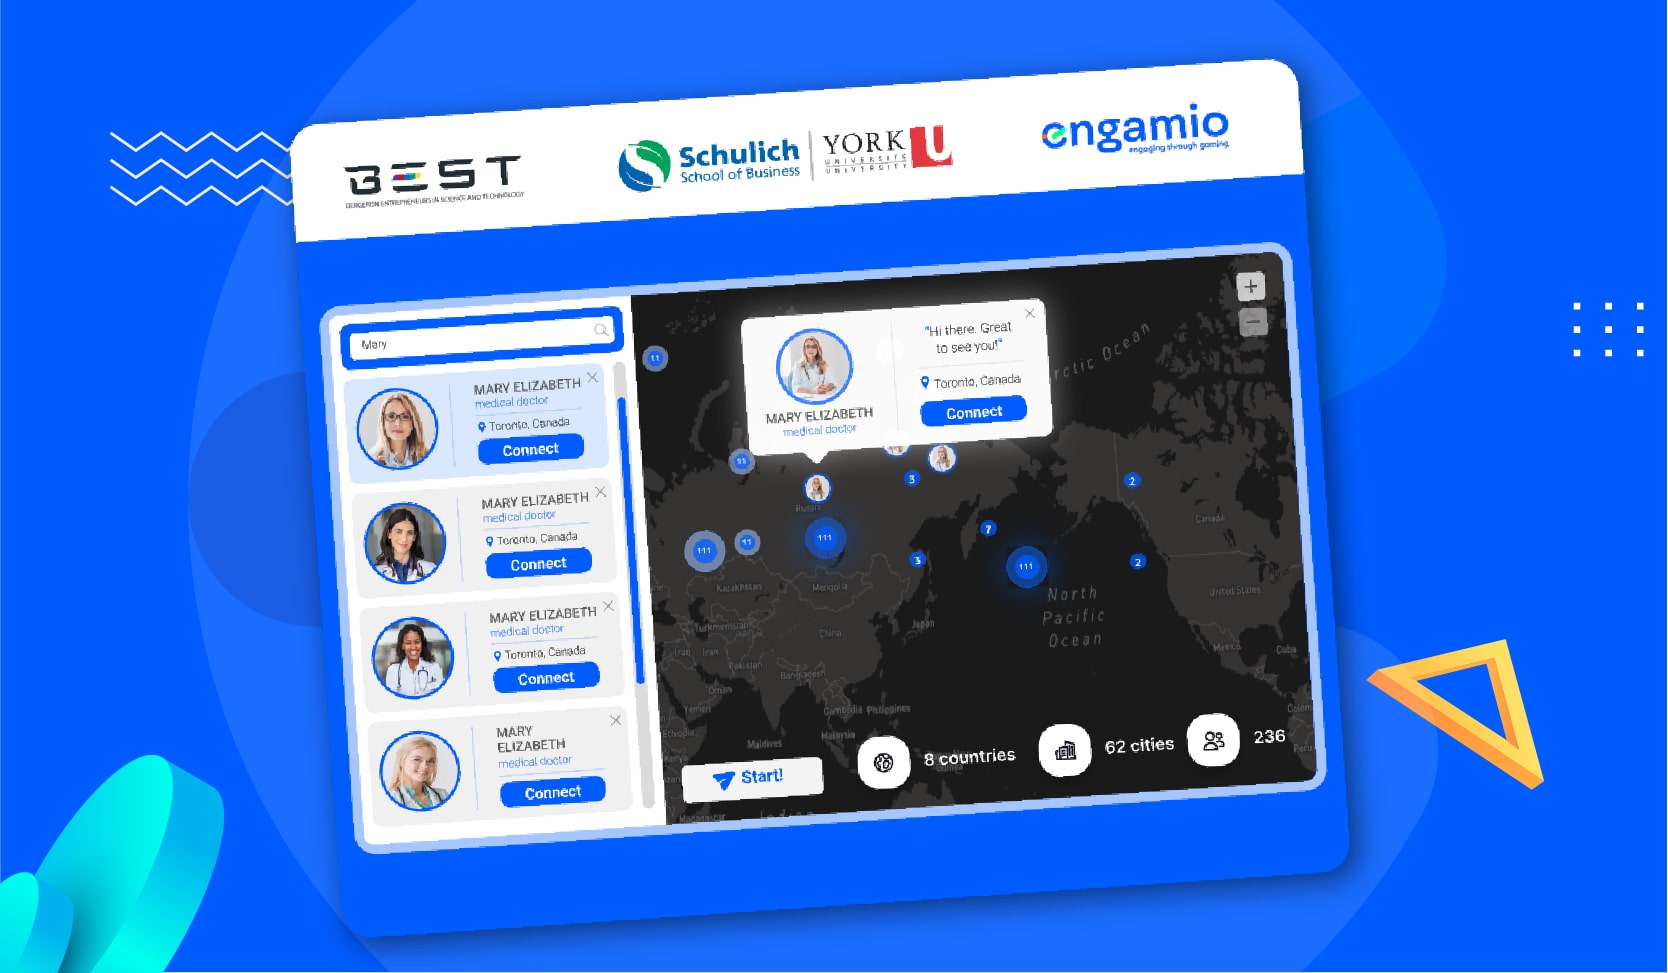 engamio Post Event Engagement: 5 Ways to Keep Attendees Engaged Post-Event